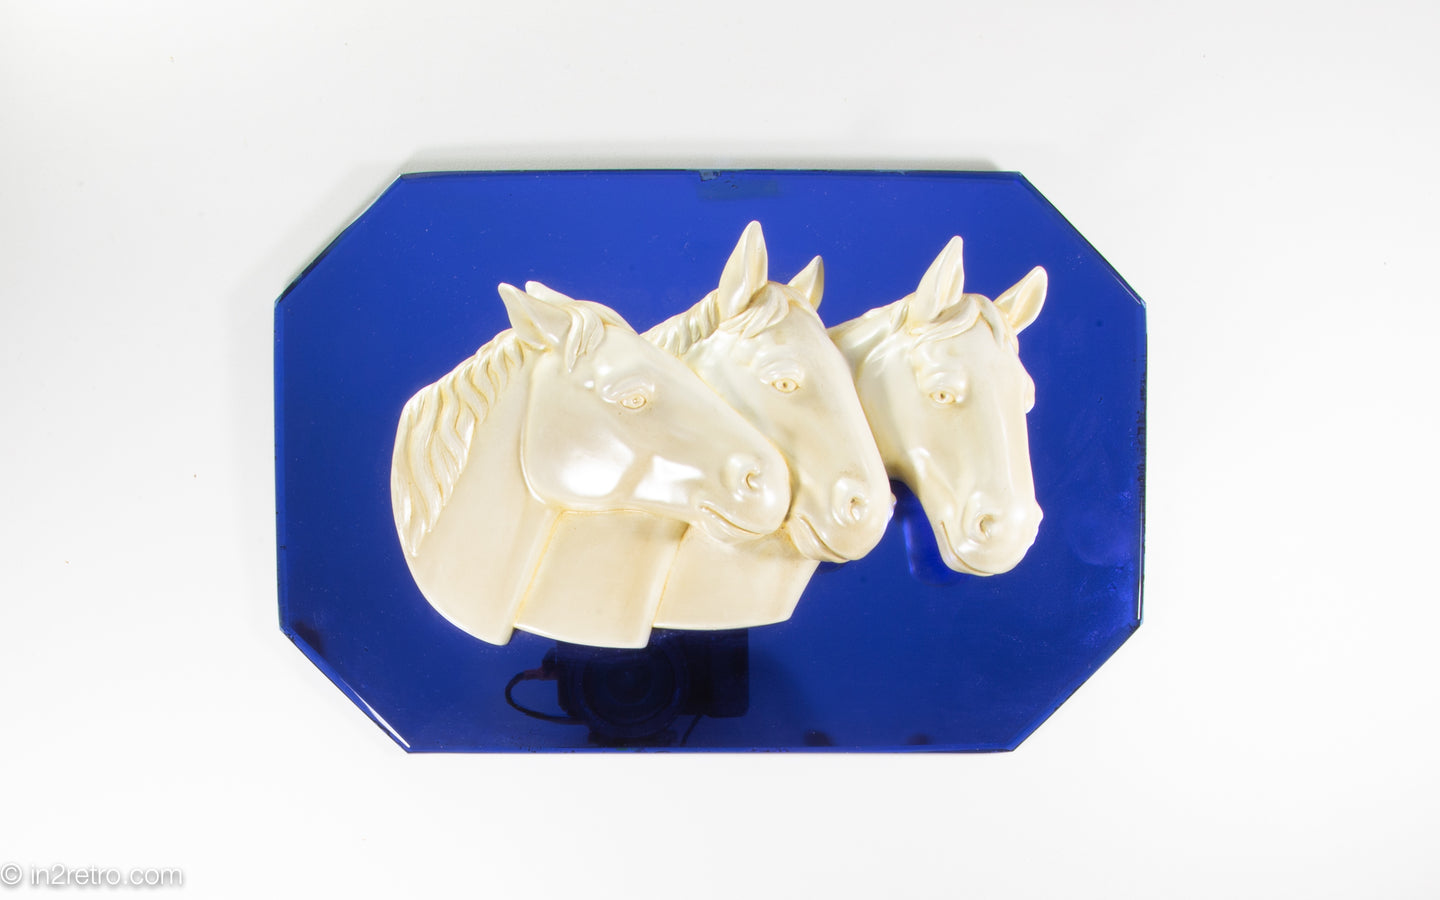 EXTREMELY RARE VINTAGE ART DECO BLUE MIRROR PLAQUE WITH 3 CHALKWARE APPLIED HORSES